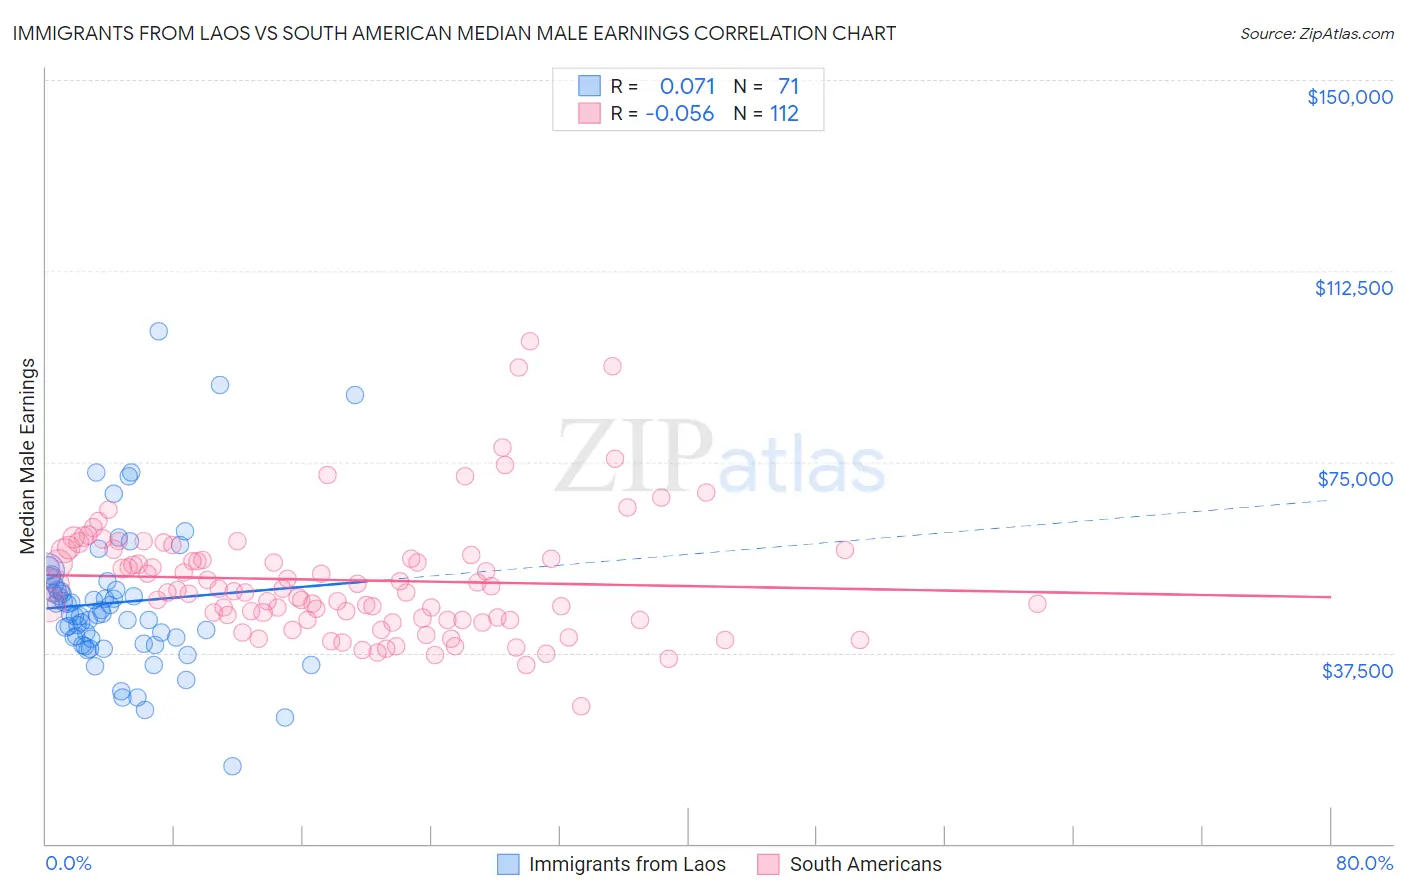 Immigrants from Laos vs South American Median Male Earnings